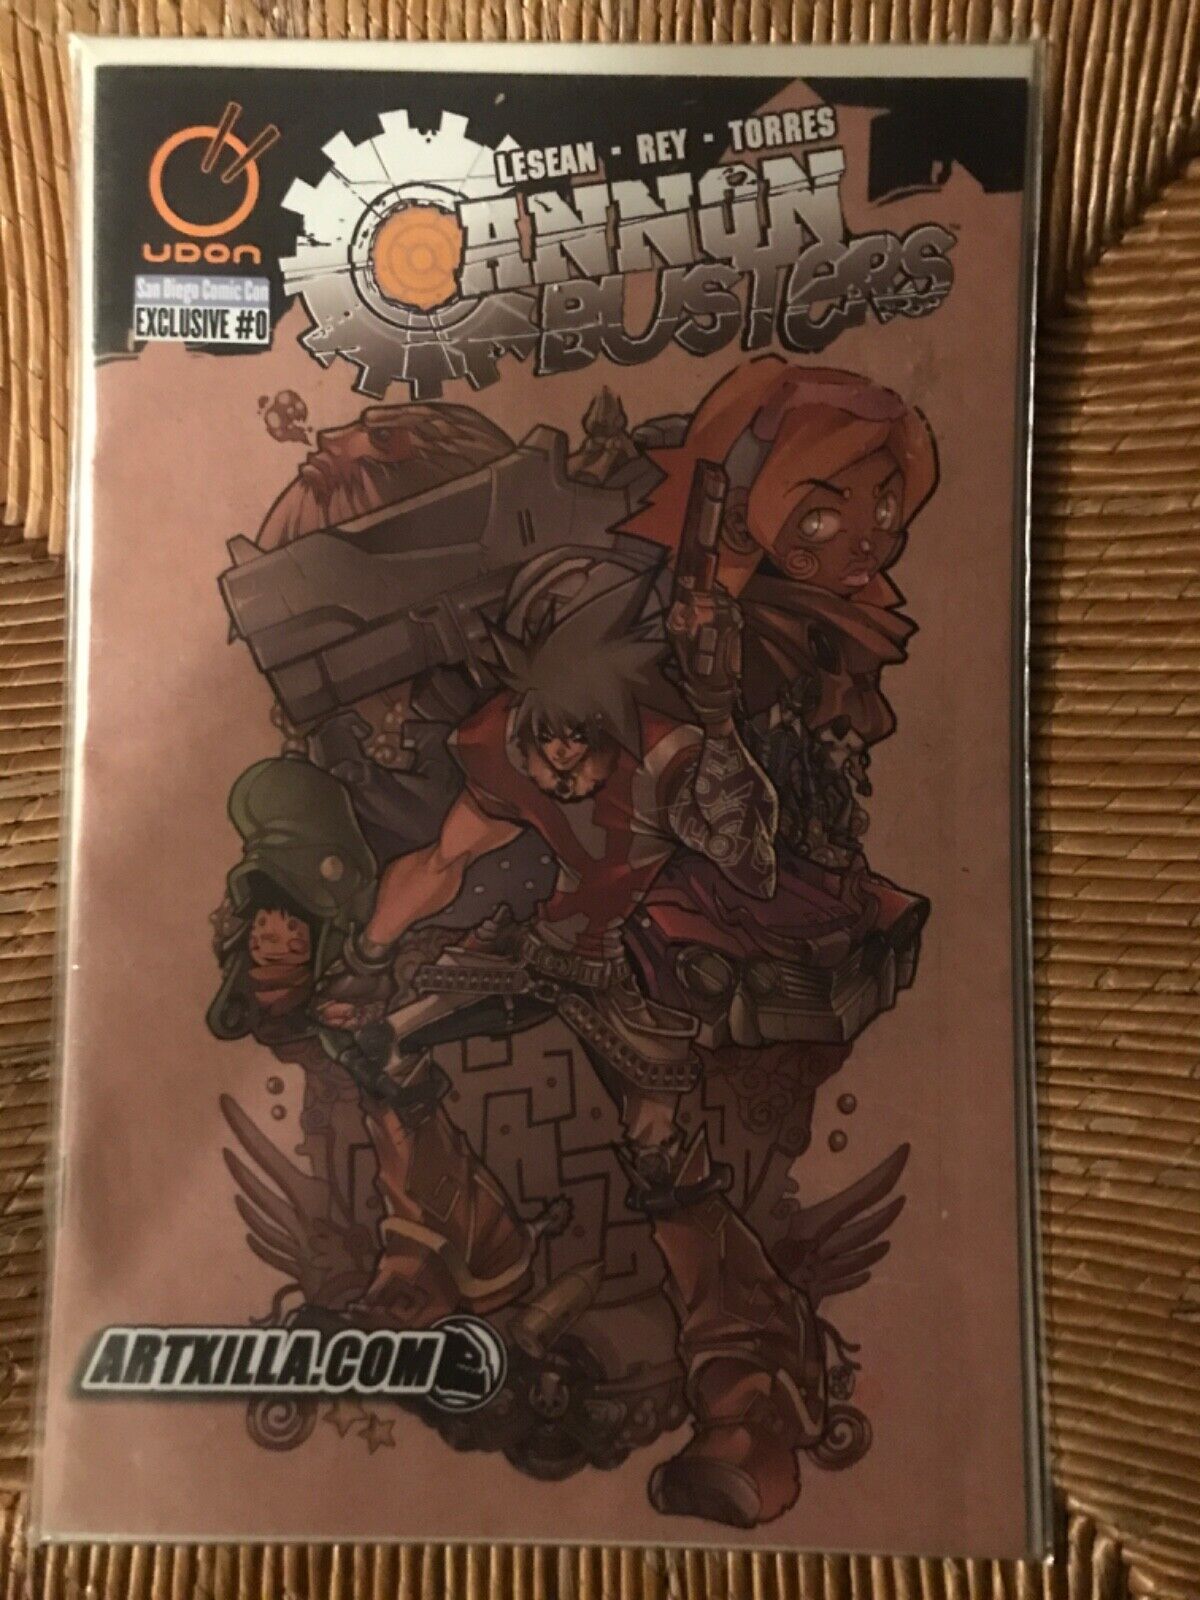 Cannon Busters 0 San Diego Comic Con Exclusive 2004 Udon Comic Book SDCC Netflix